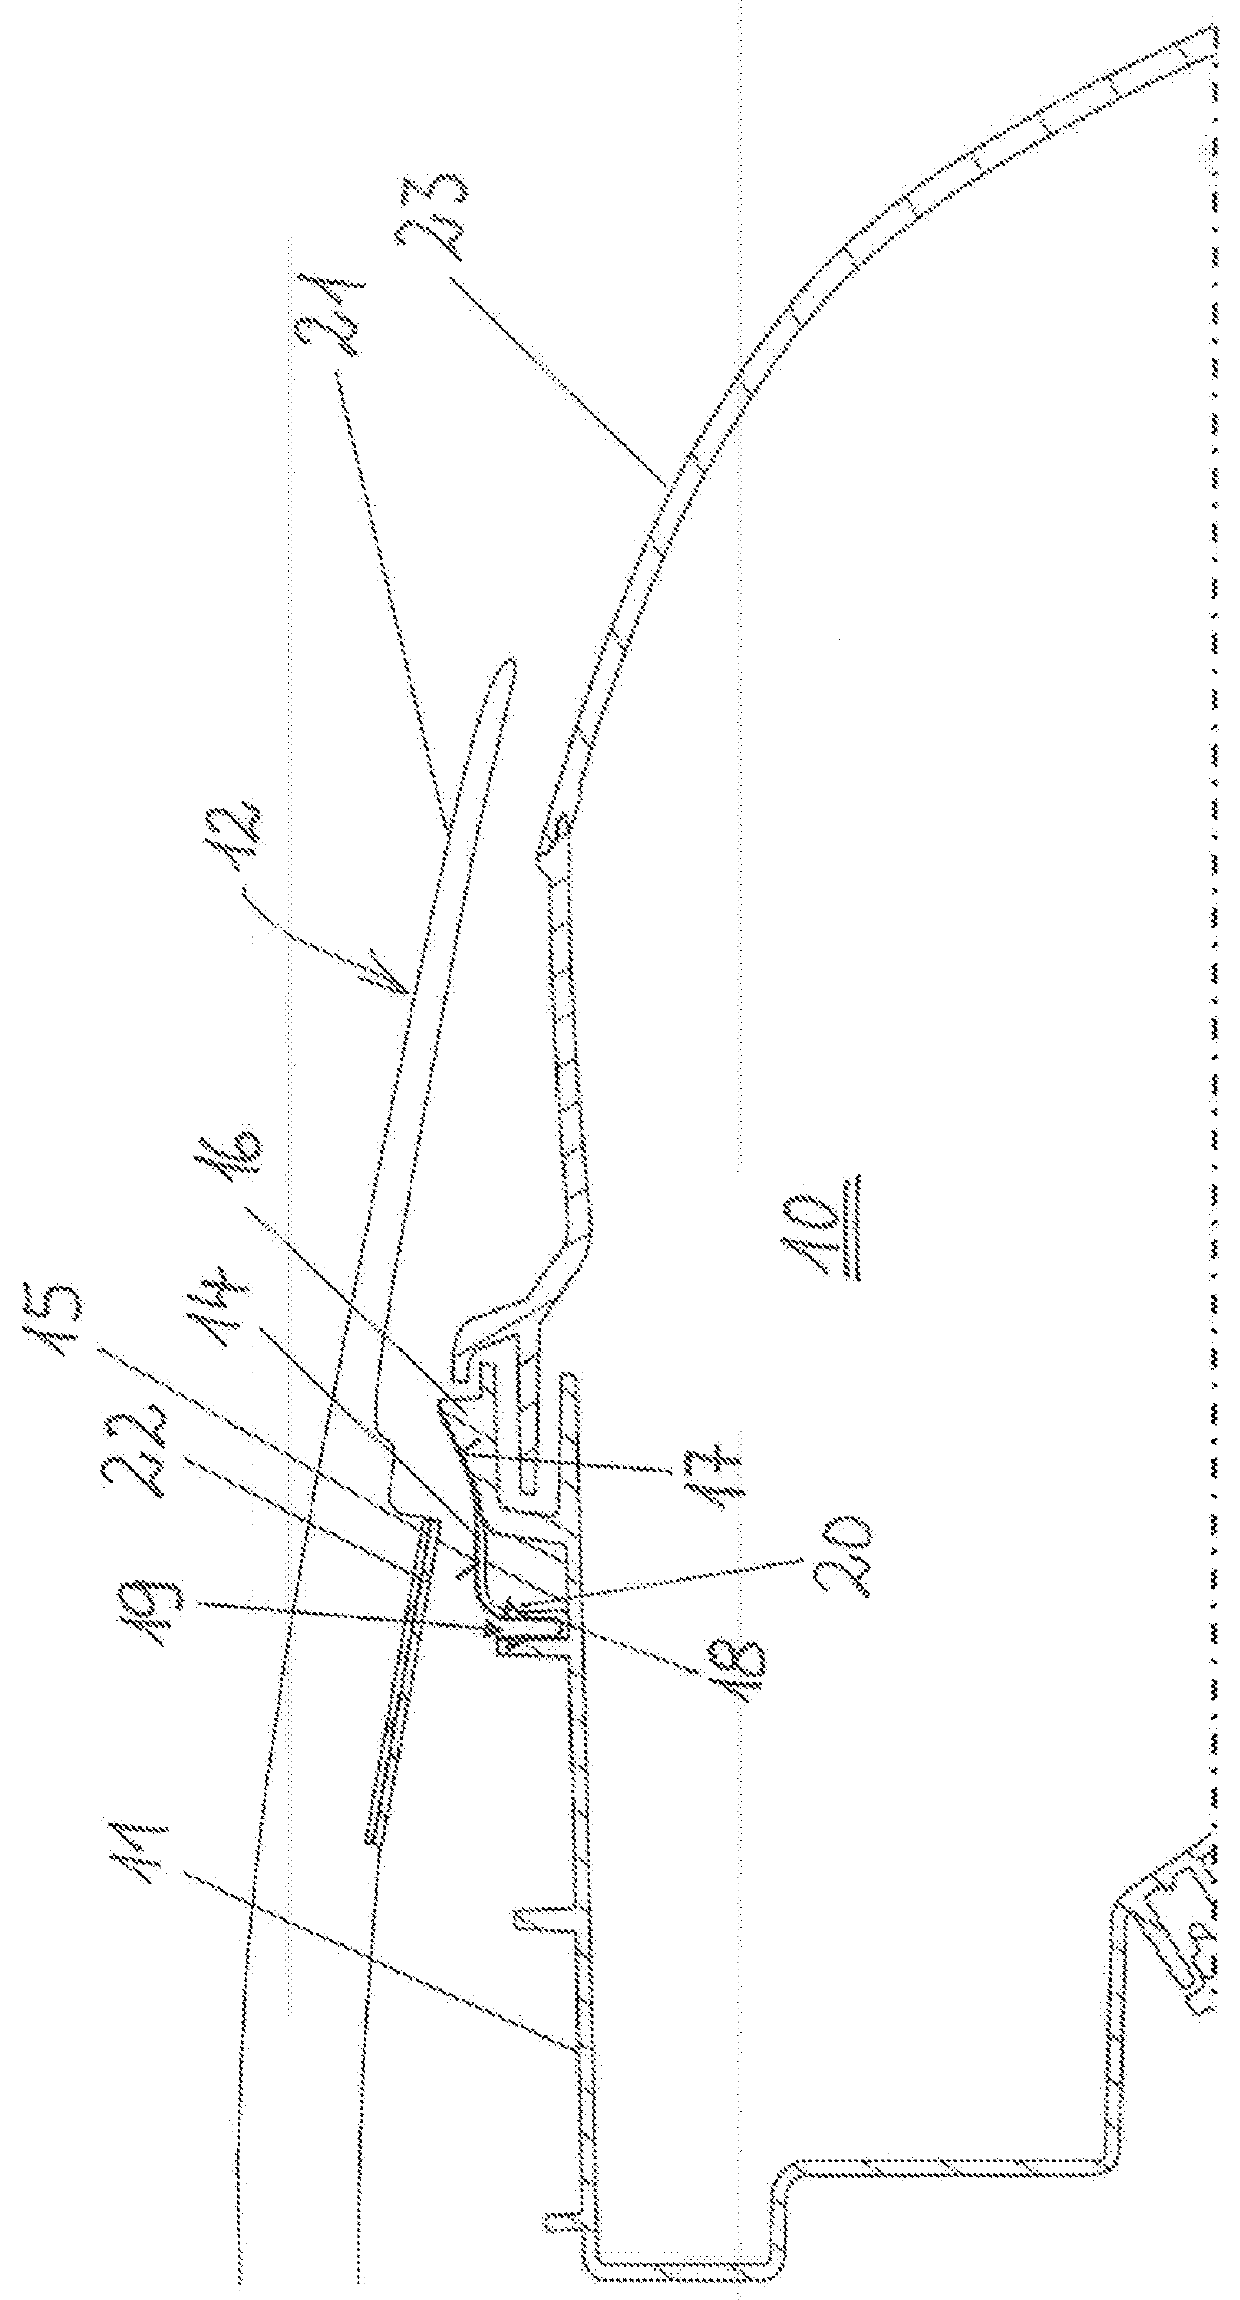 Arrangement of a headlight in a vehicle having damage protection for the event of a crash